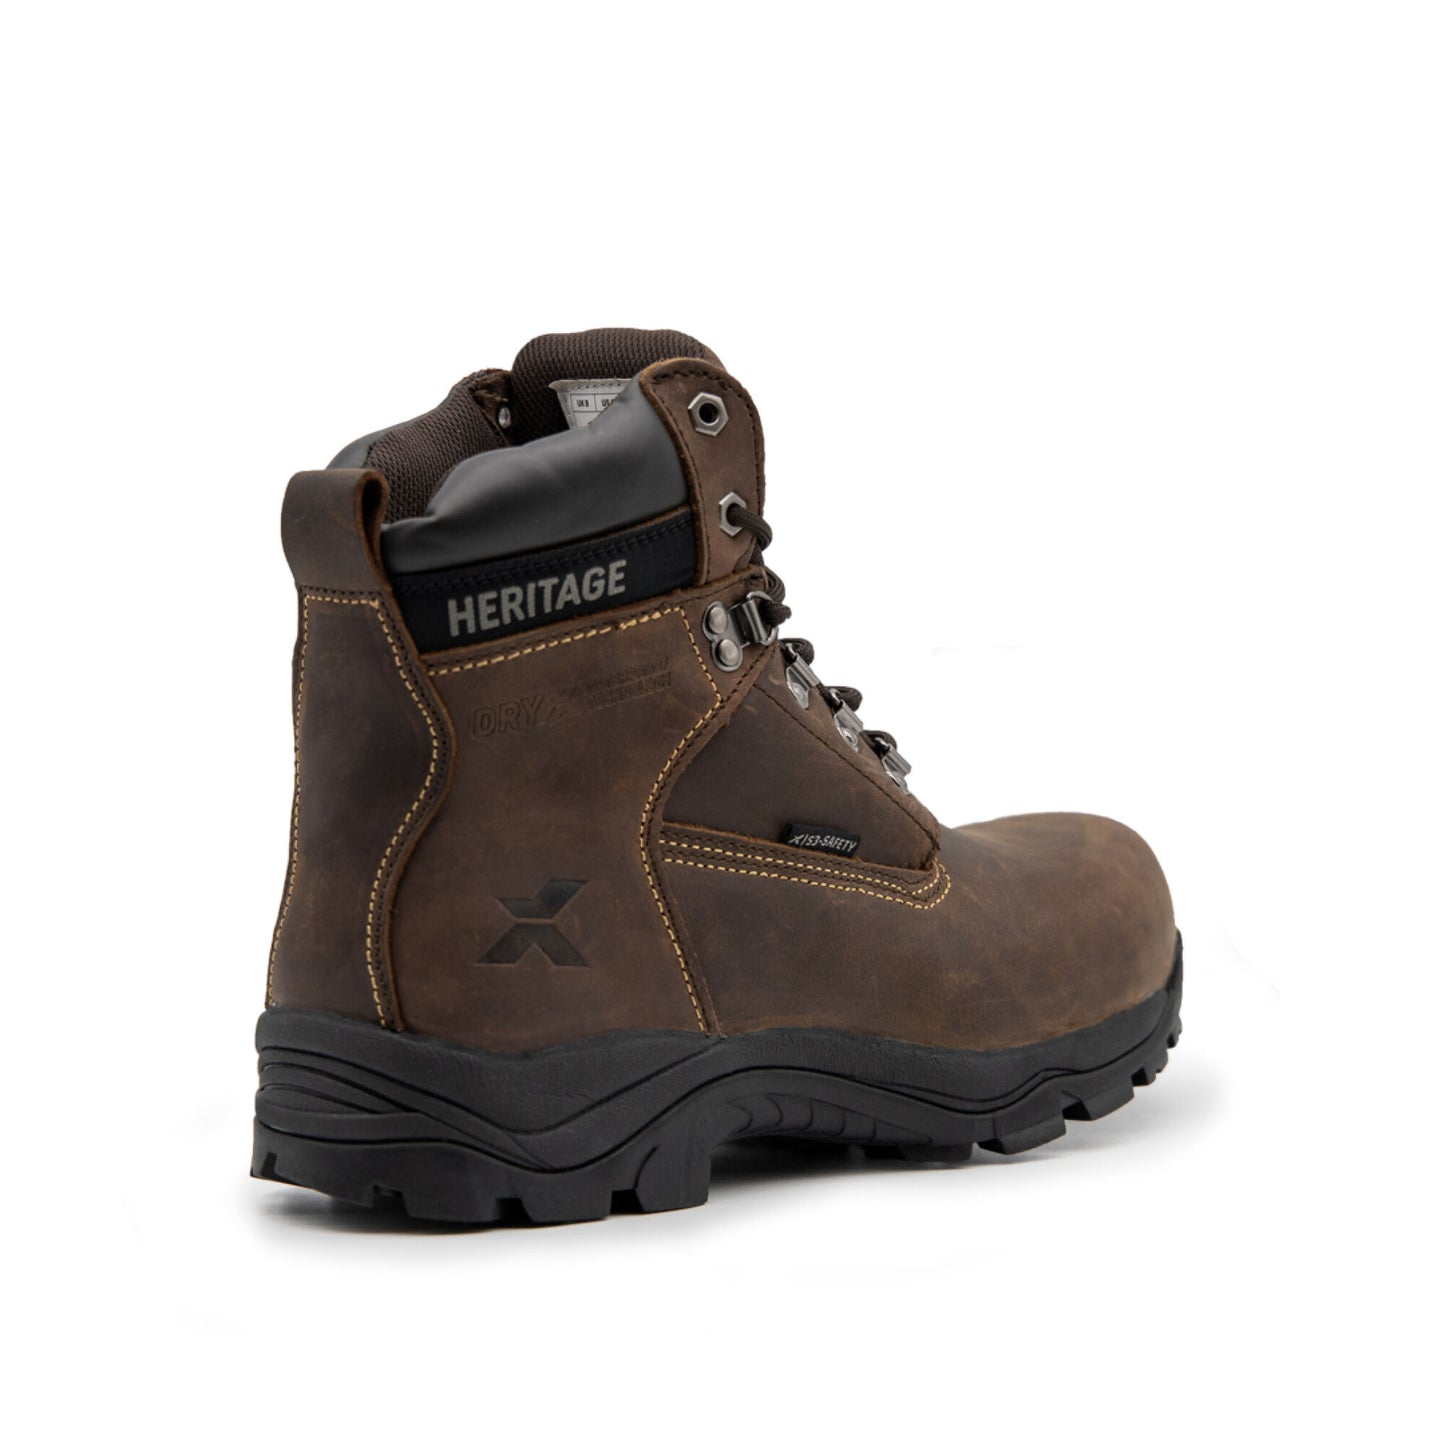 Xpert Heritage Legend S3 Safety Boot - Brown